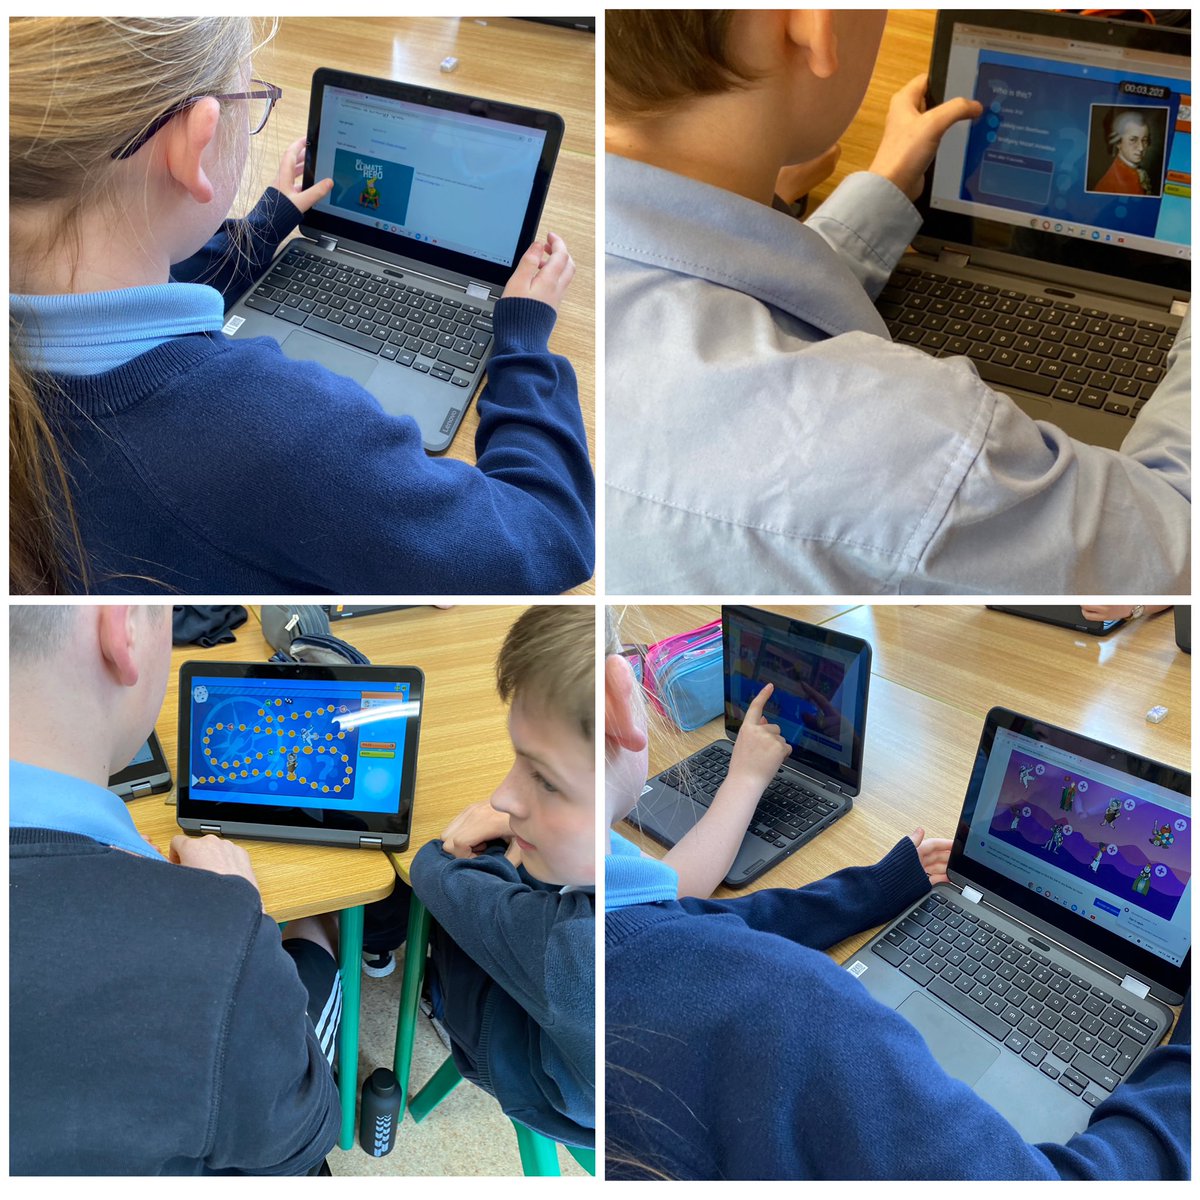 To celebrate #EuropeDay2024 we played some online games to reinforce our learning on the European Union @BlueStarProg